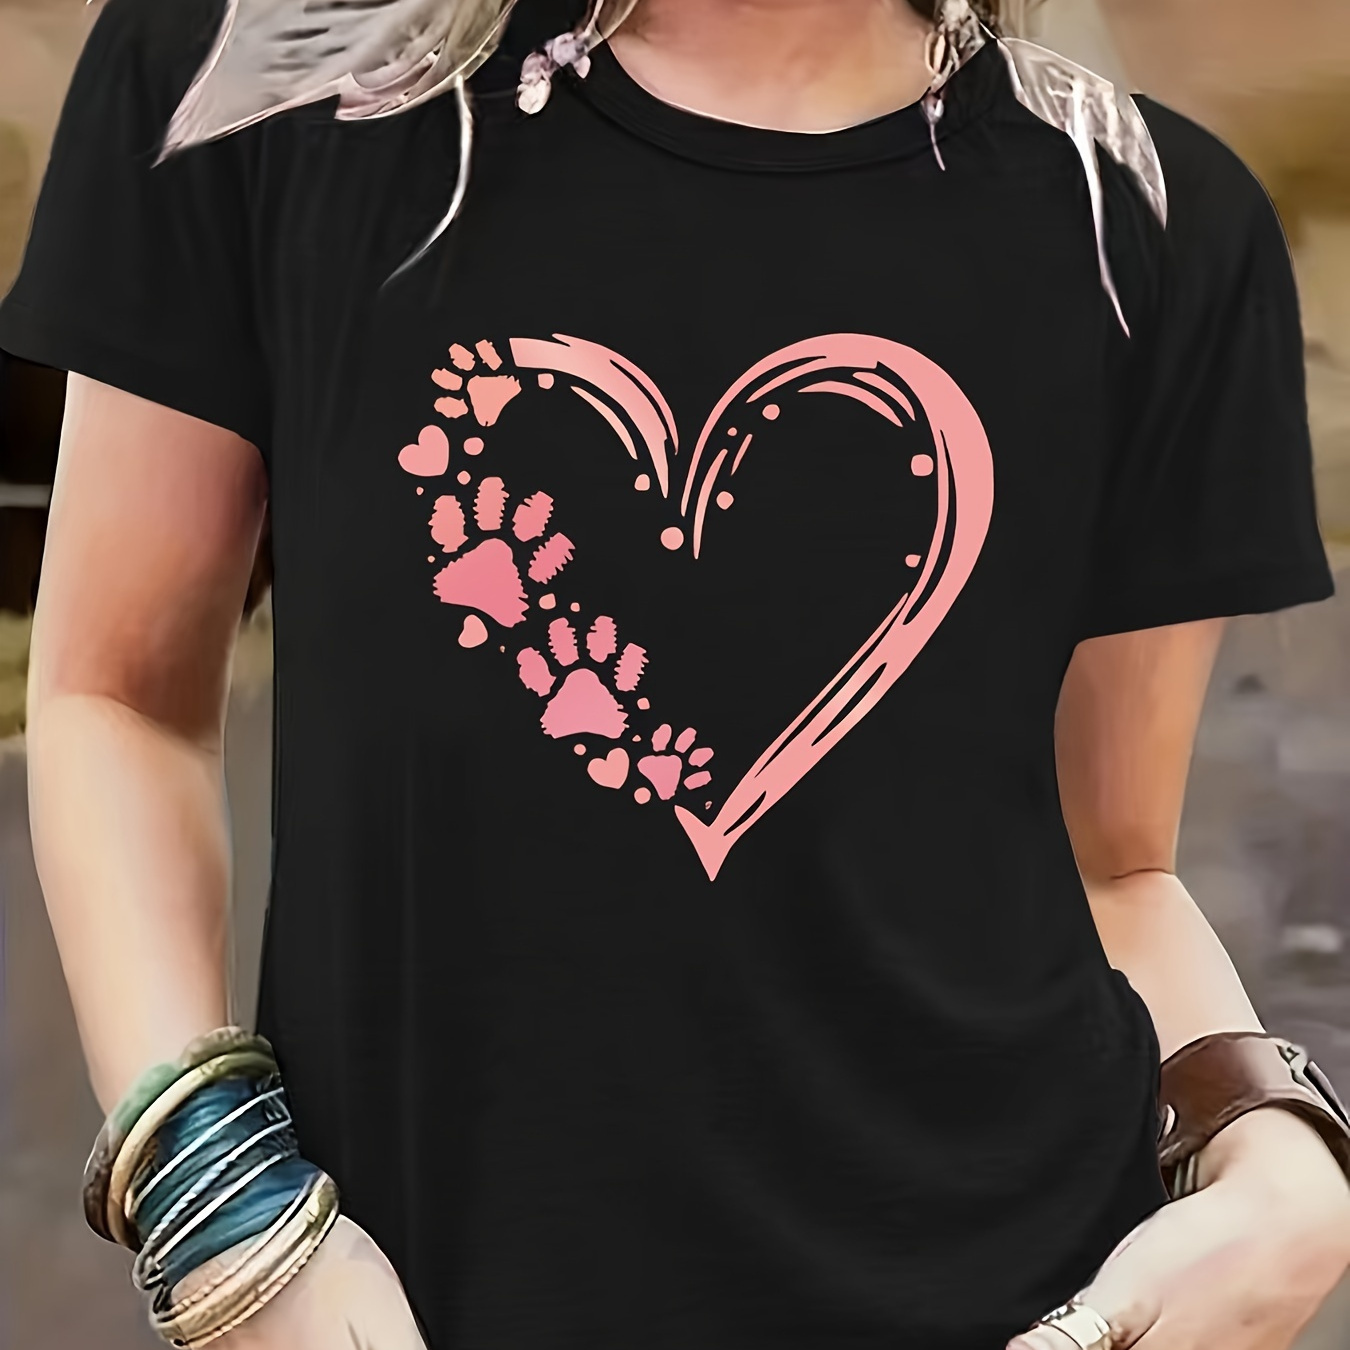 

Heart & Paw Print T-shirt, Casual Short Sleeve Crew Neck Top For Spring & Summer, Women's Clothing